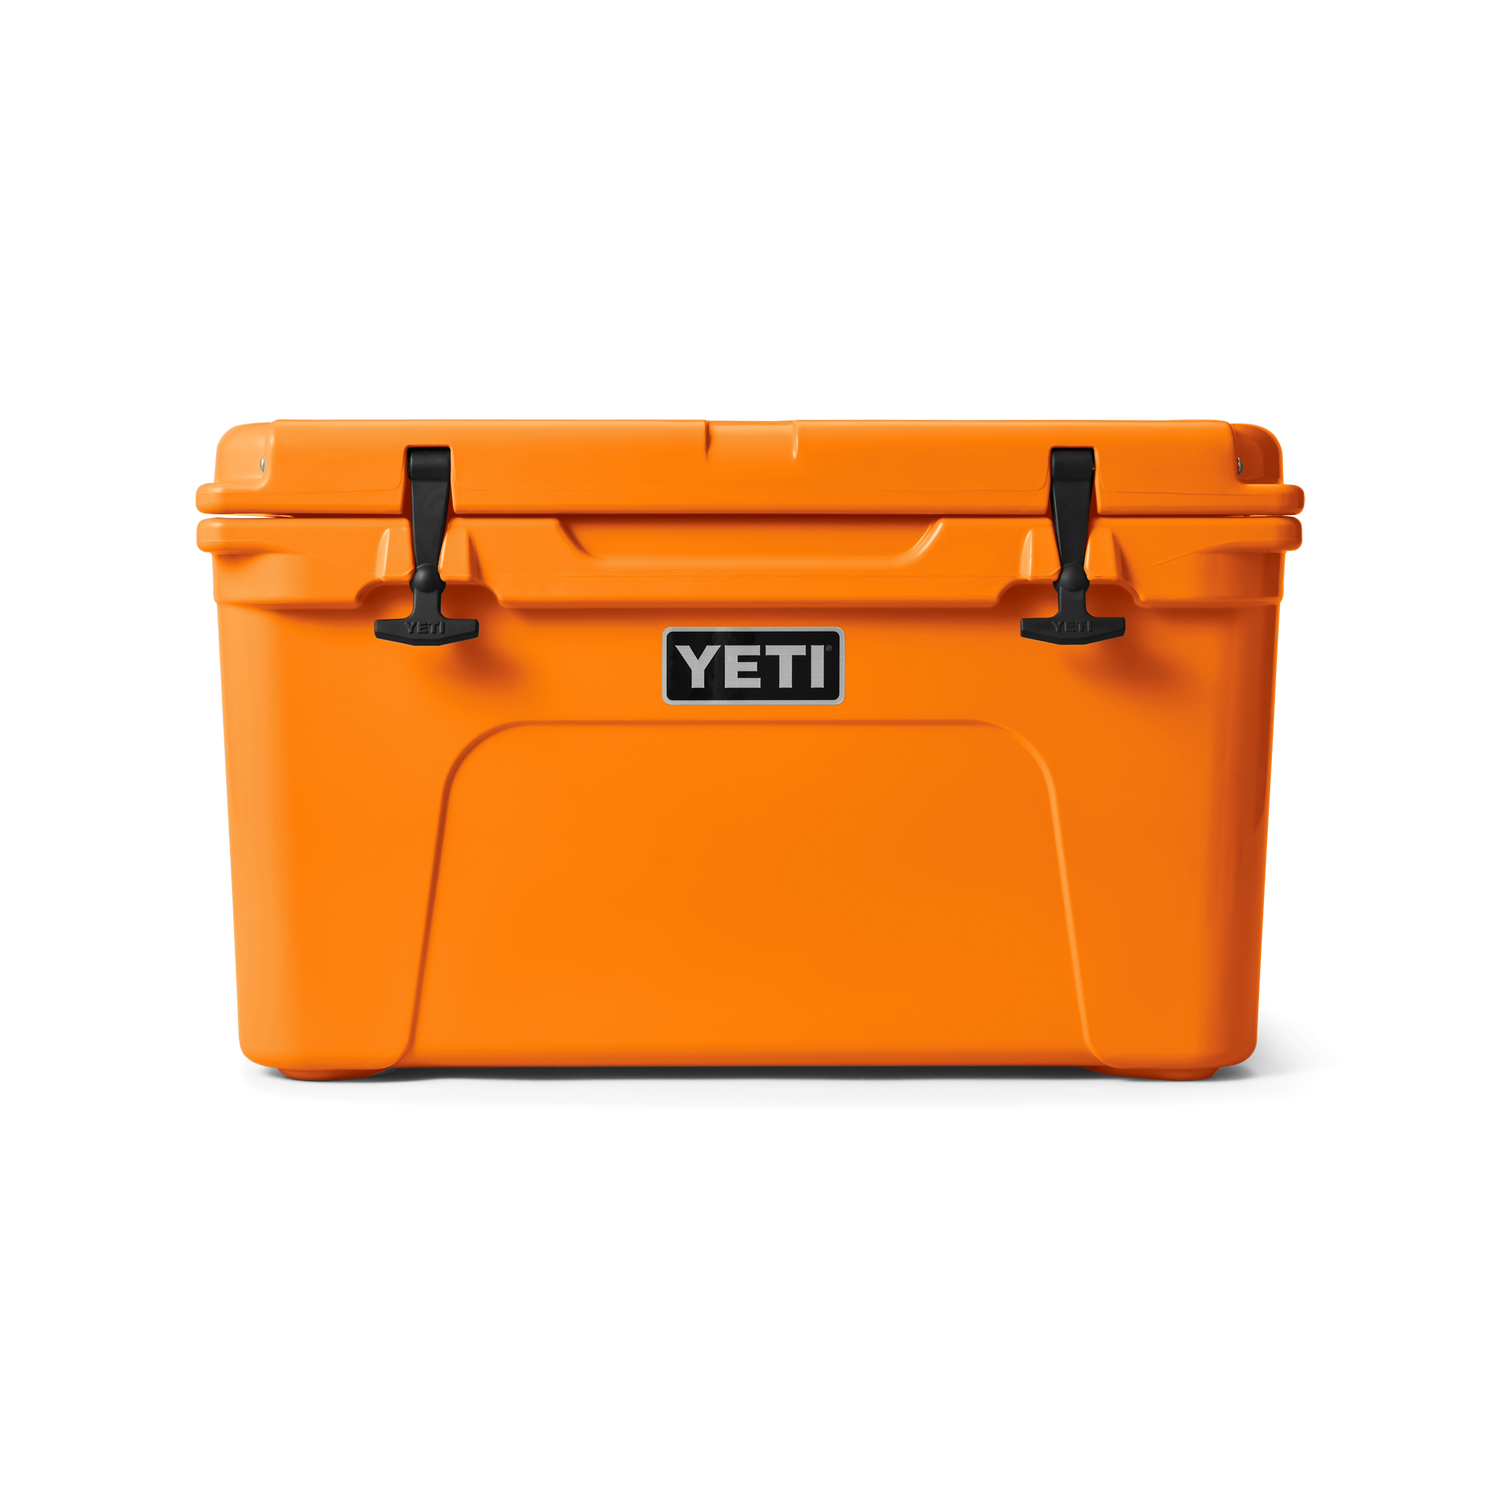 YETI Premium Cool Boxes, Ice Chests And Coolers – YETI UK LIMITED